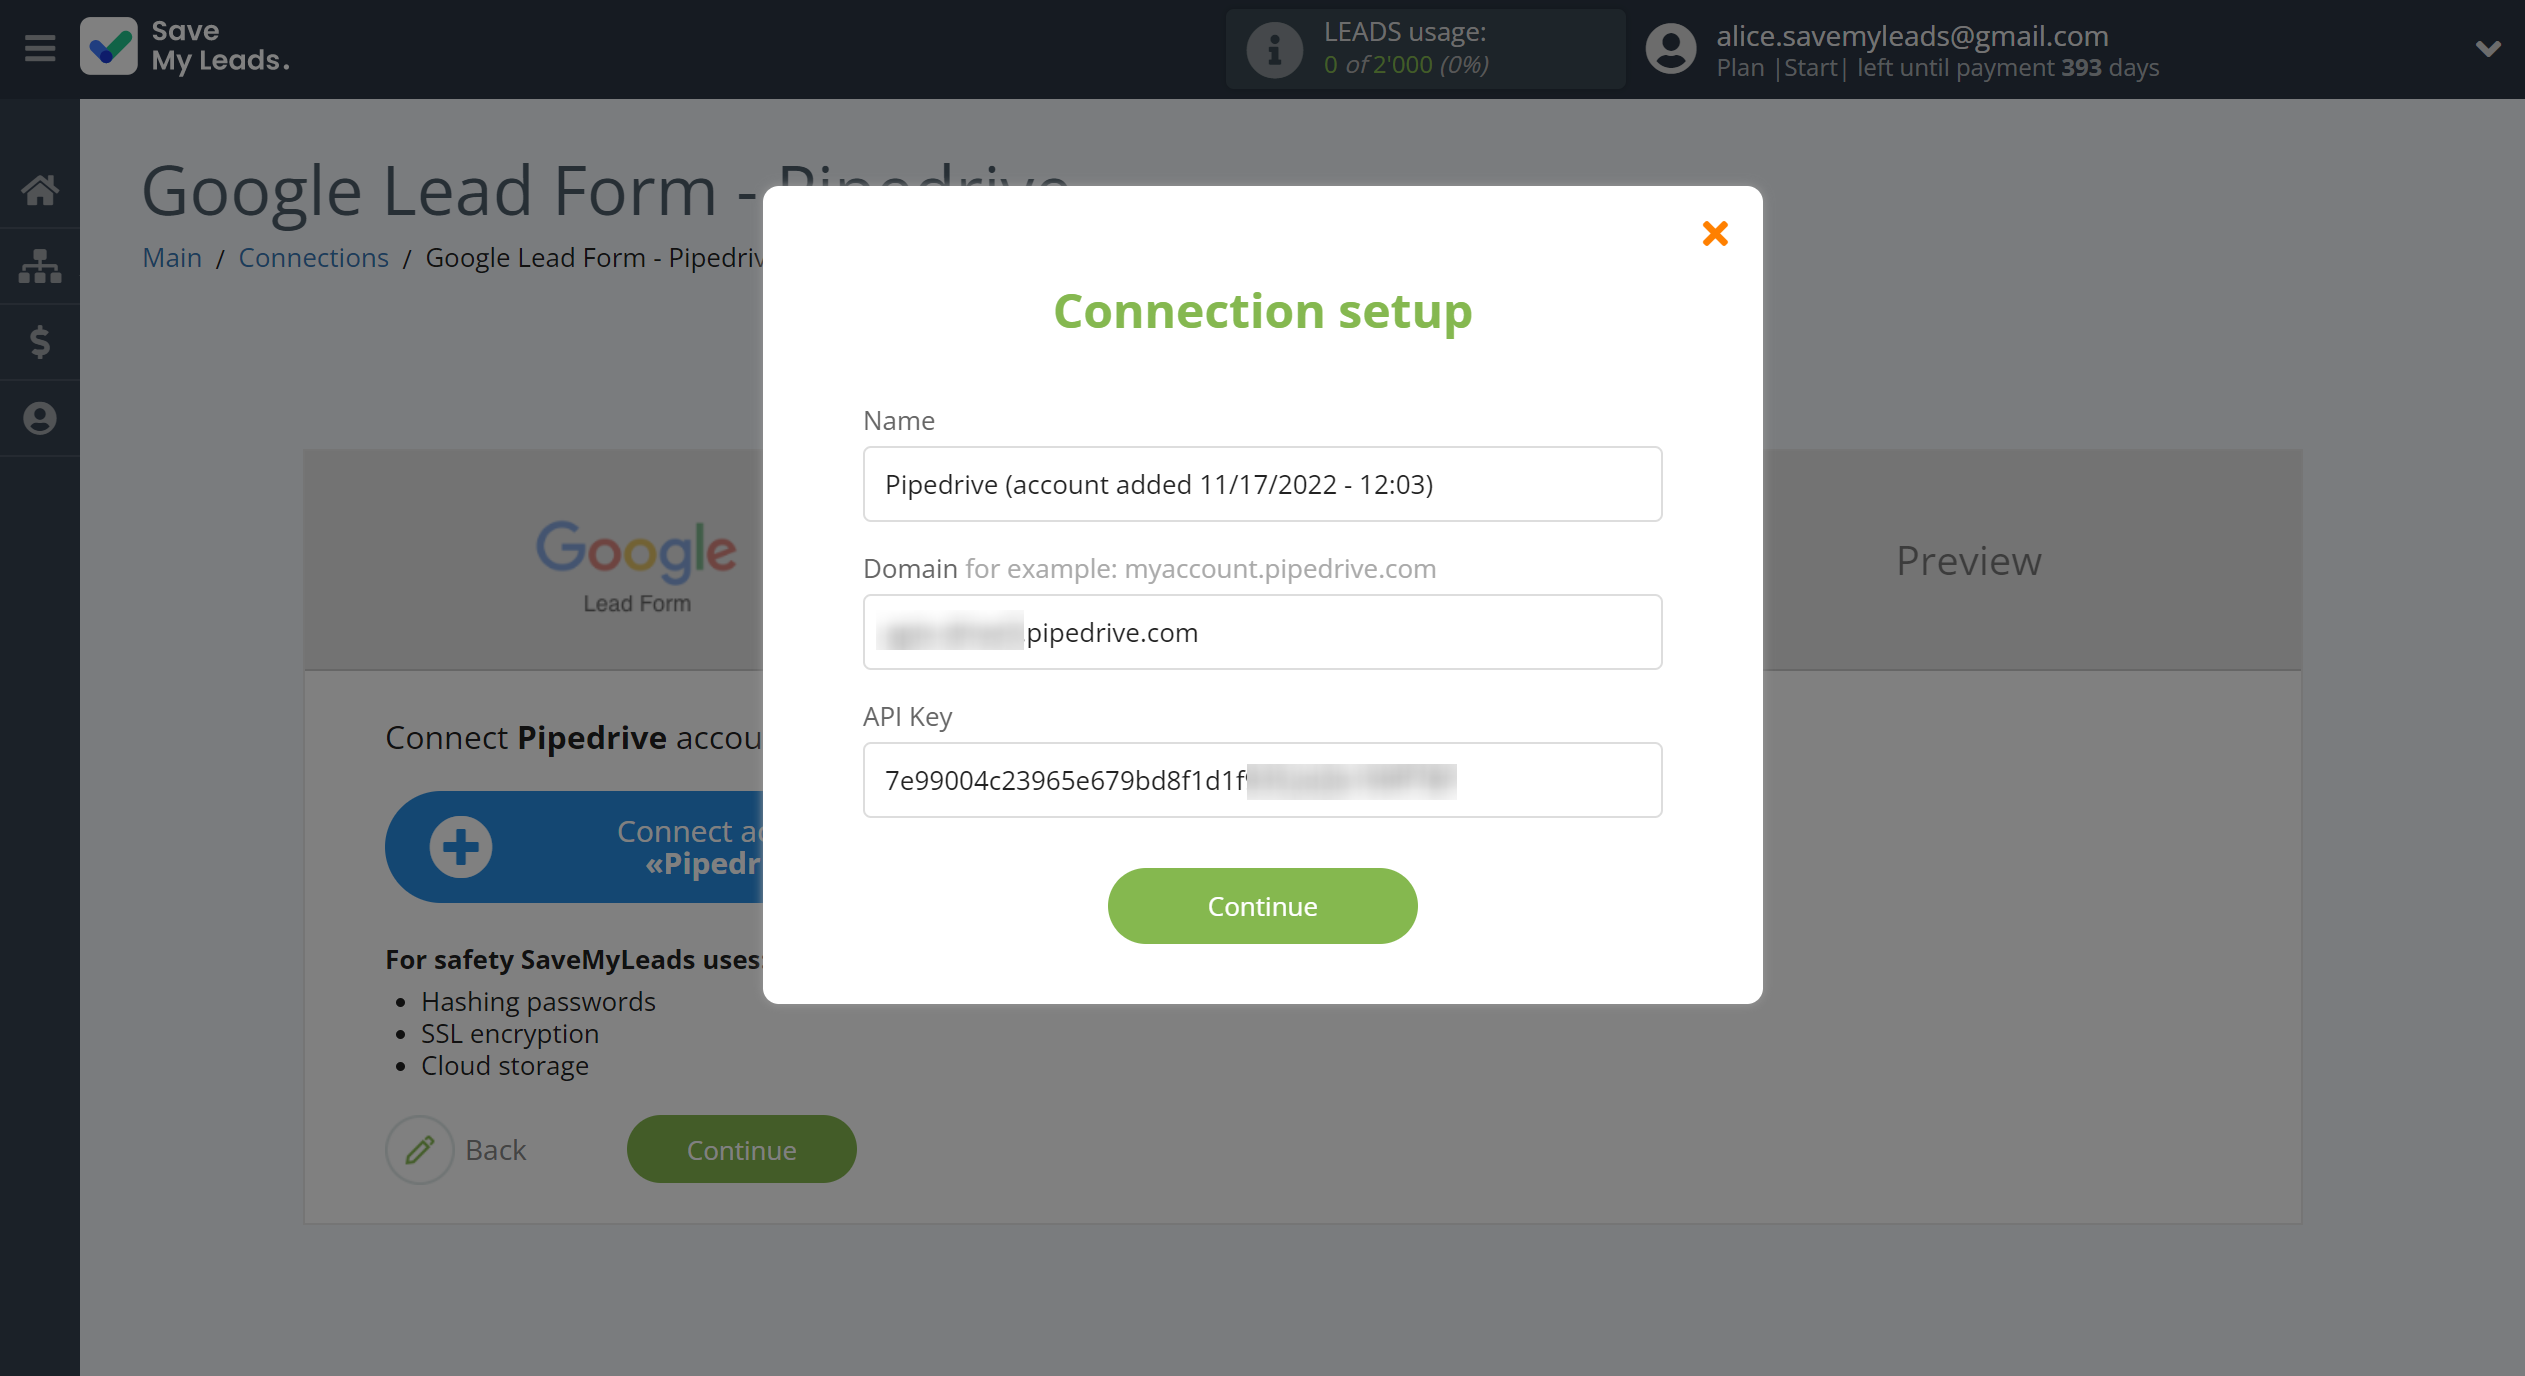 How to Connect Google Lead Form with Pipedrive Create Deal | Data Destination account connection